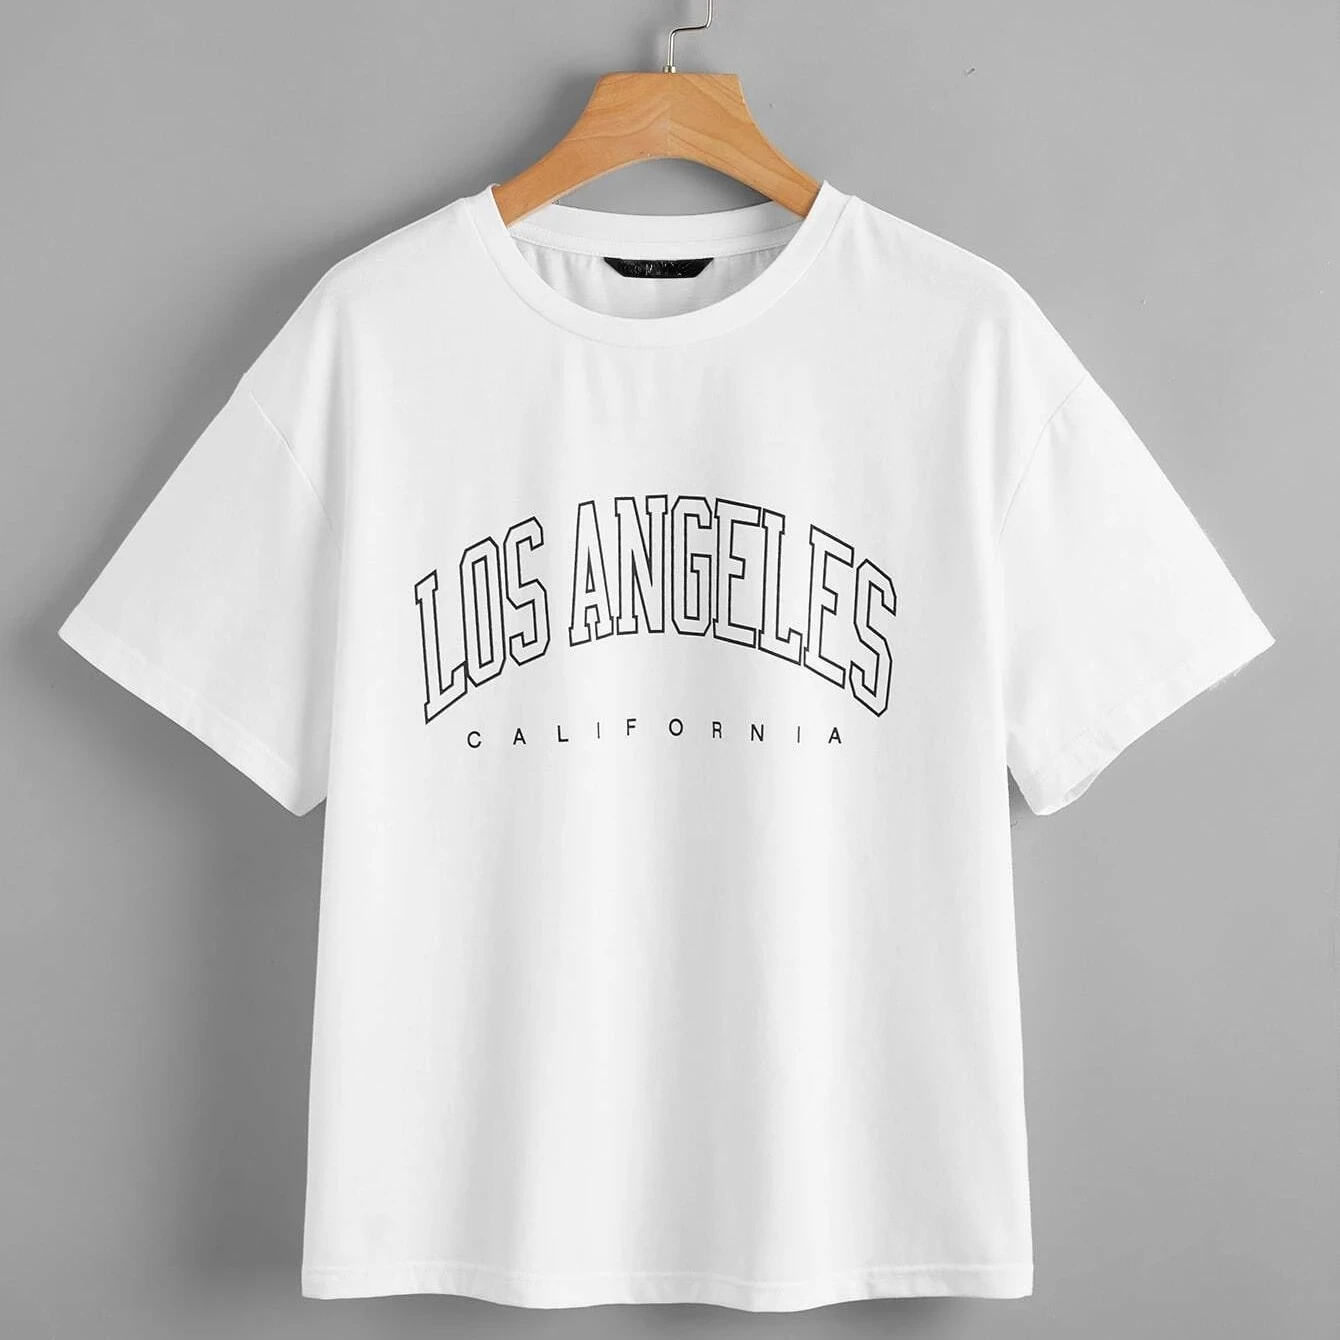 Los Angeles Graphic T Shirts Women Fashion Trend 2021 Spring Summer Clothes Letter Tshirt Top Lady Print Female Tee Shirt|T-Shirts| - AliExpress